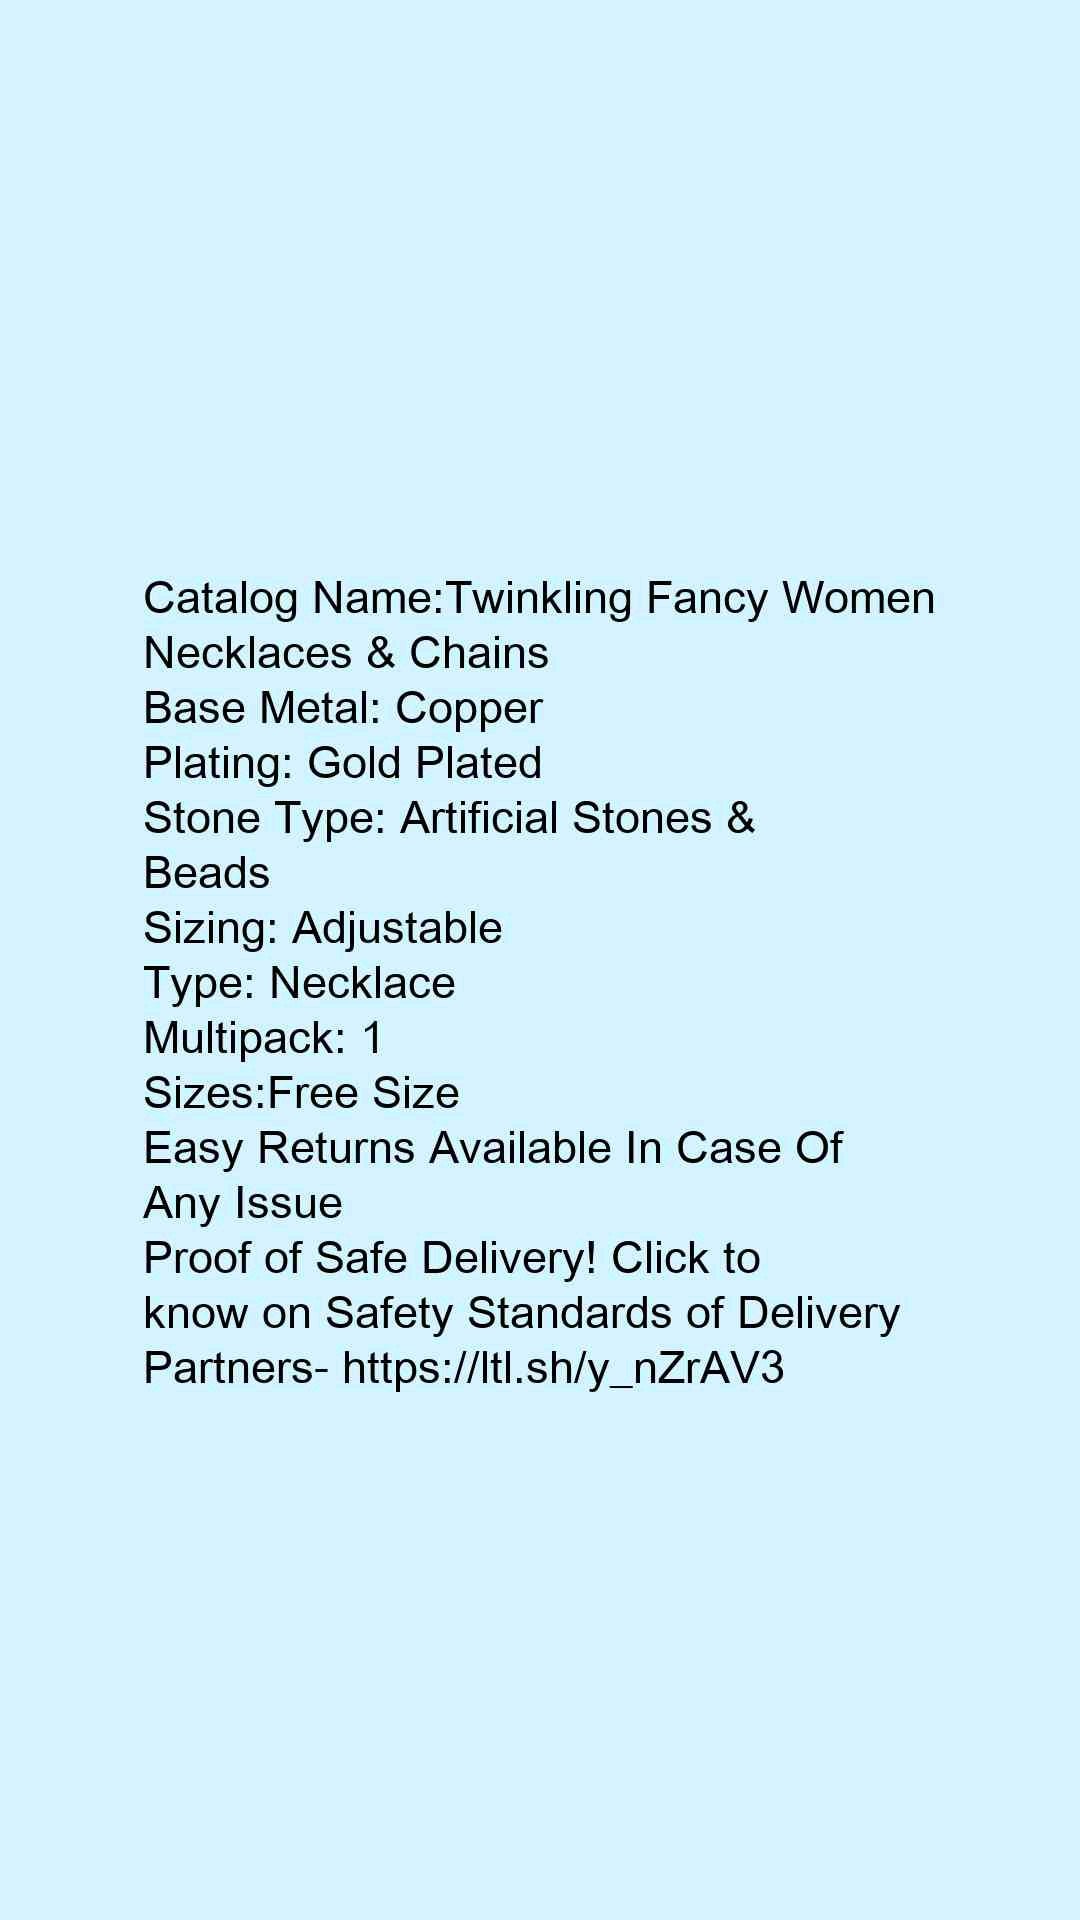 Twinkling Fancy Women Necklaces & Chains